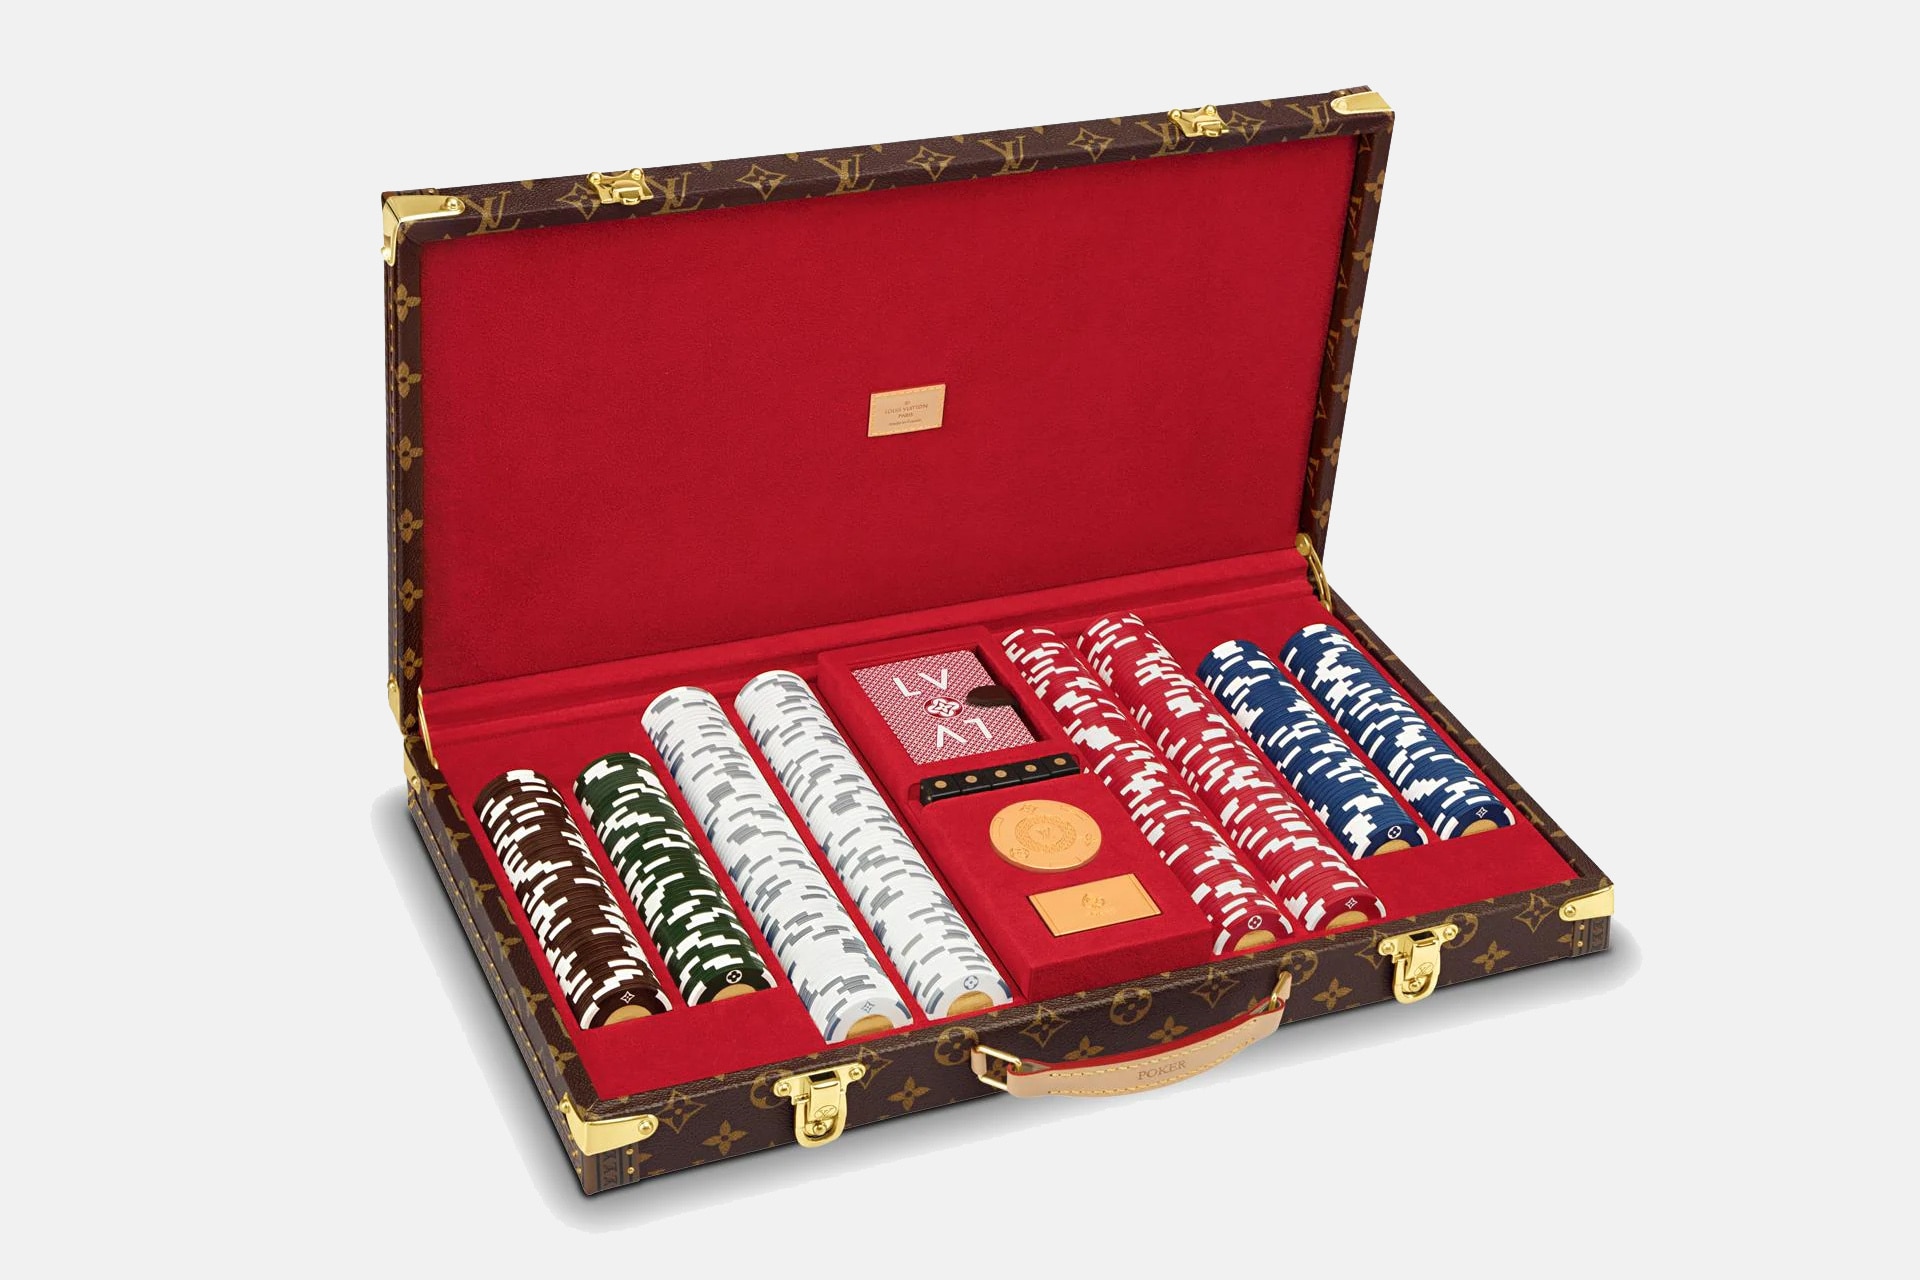 Louis Vuitton's $32,500 Poker Set Is Here To Elevate Your Next Games Night  - GQ Australia